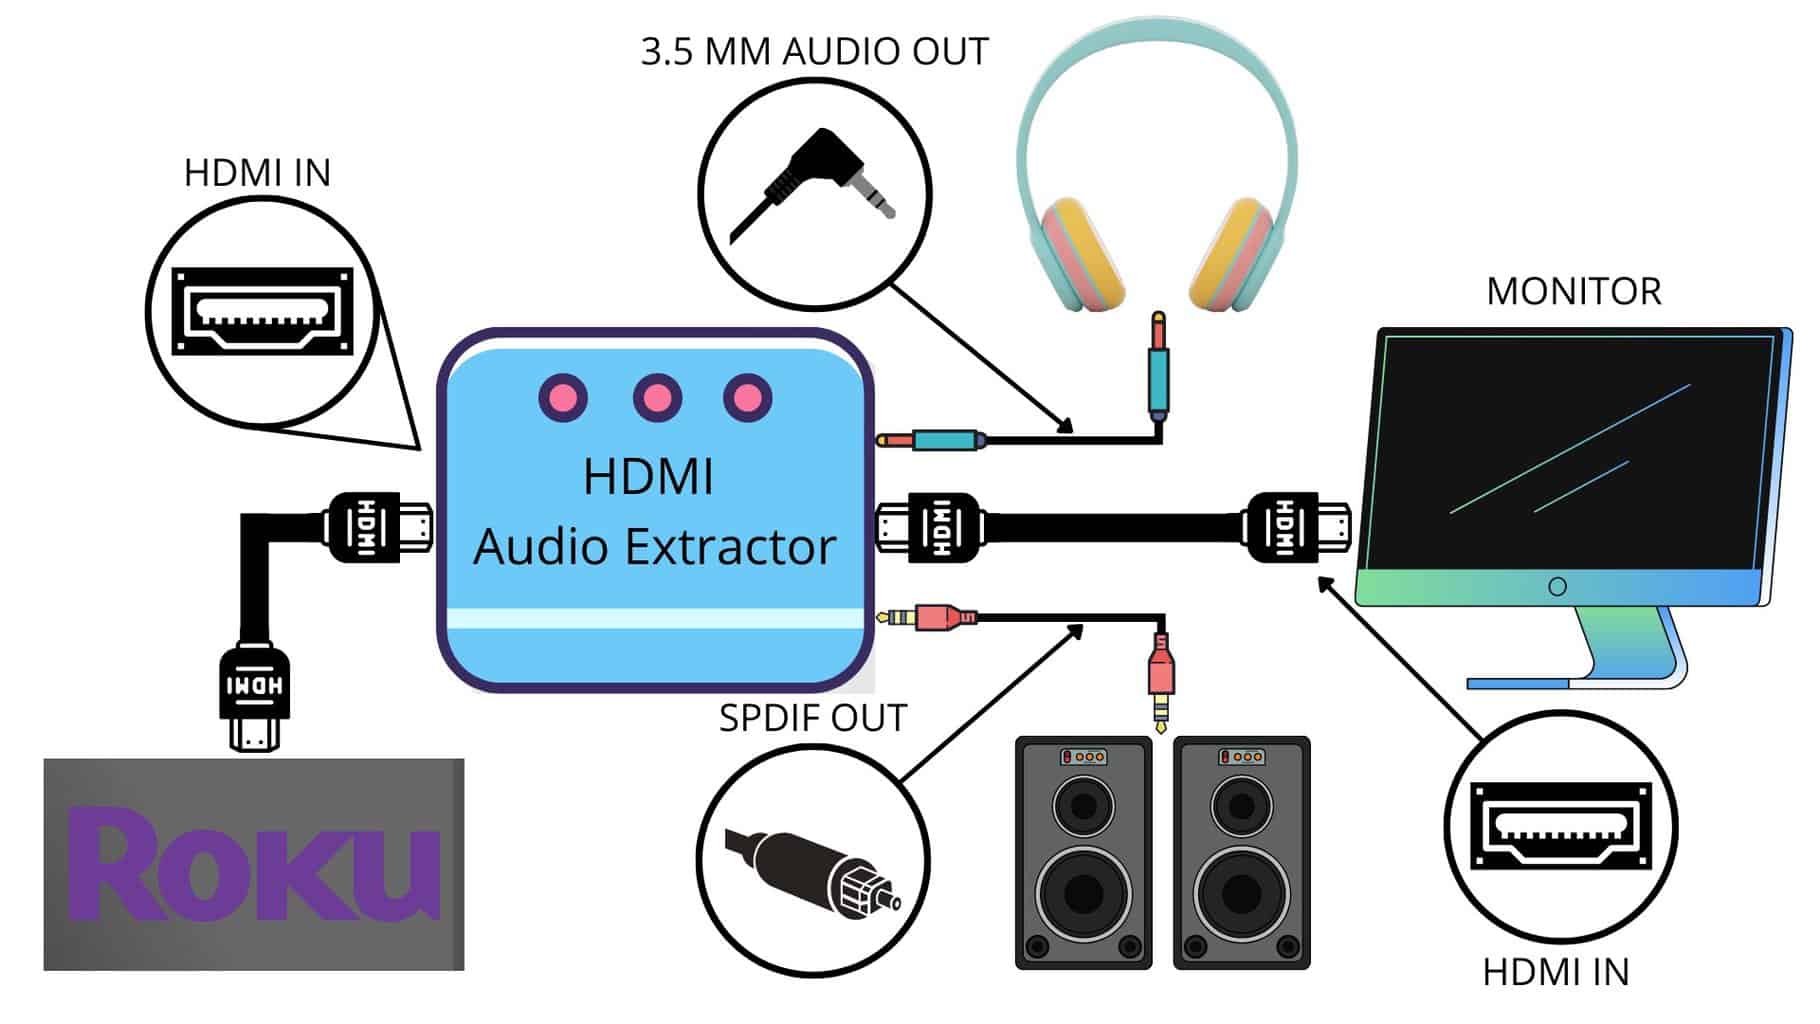 Connect a Roku to a monitor using an HDMI audio extractor